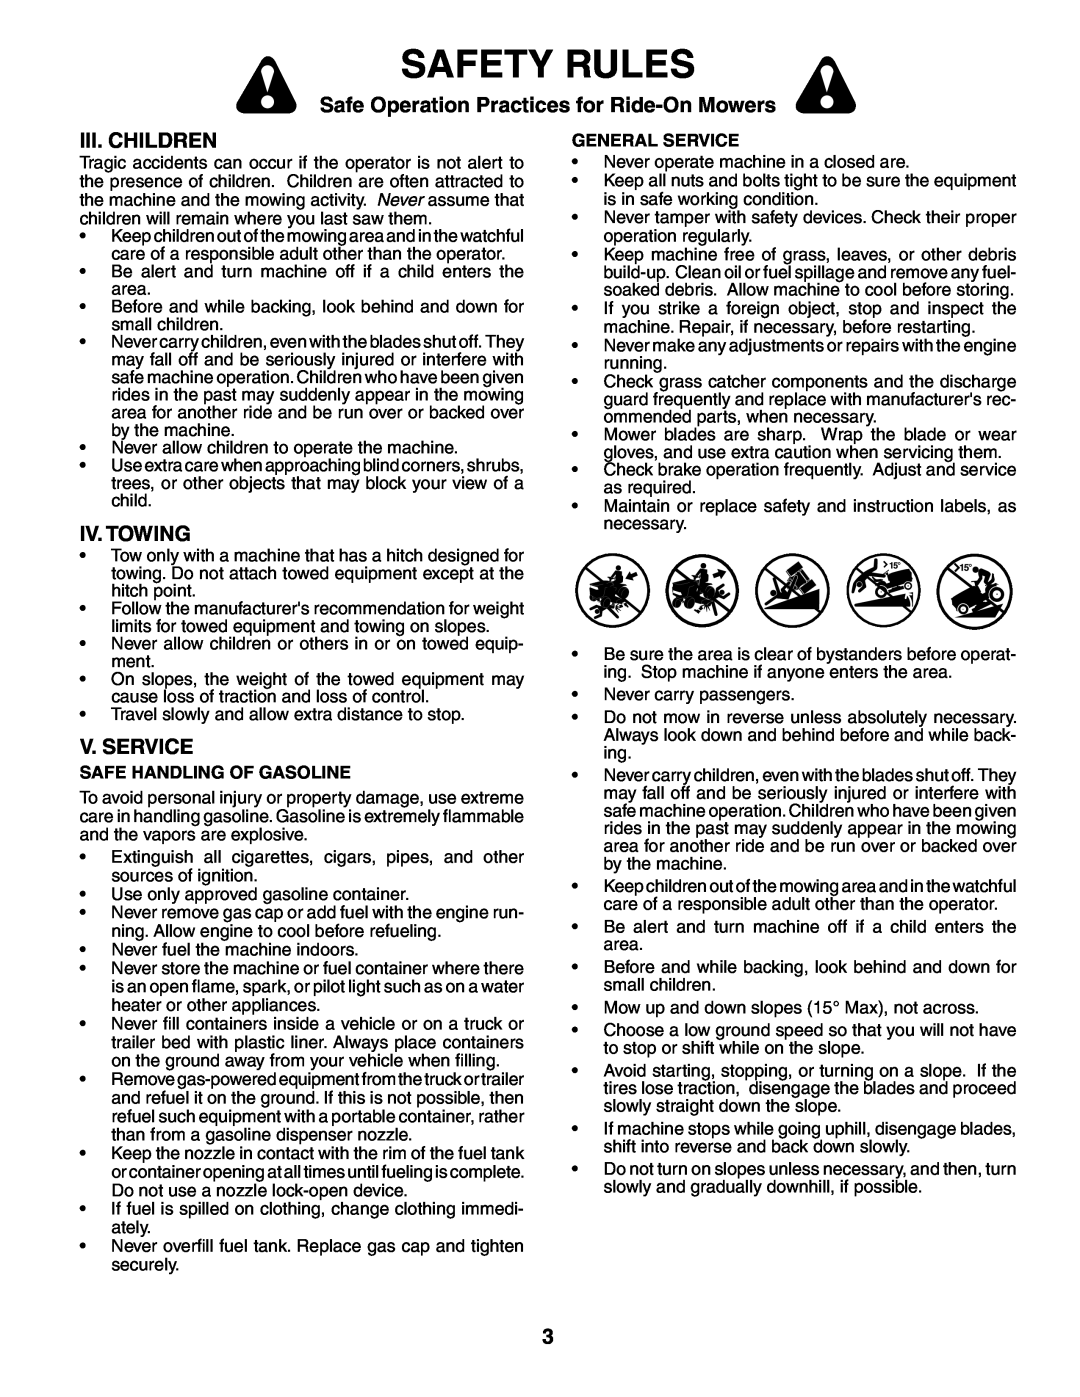 Poulan XT24H42YT manual Iii. Children, Iv. Towing, V. Service, Safety Rules, Safe Operation Practices for Ride-OnMowers 